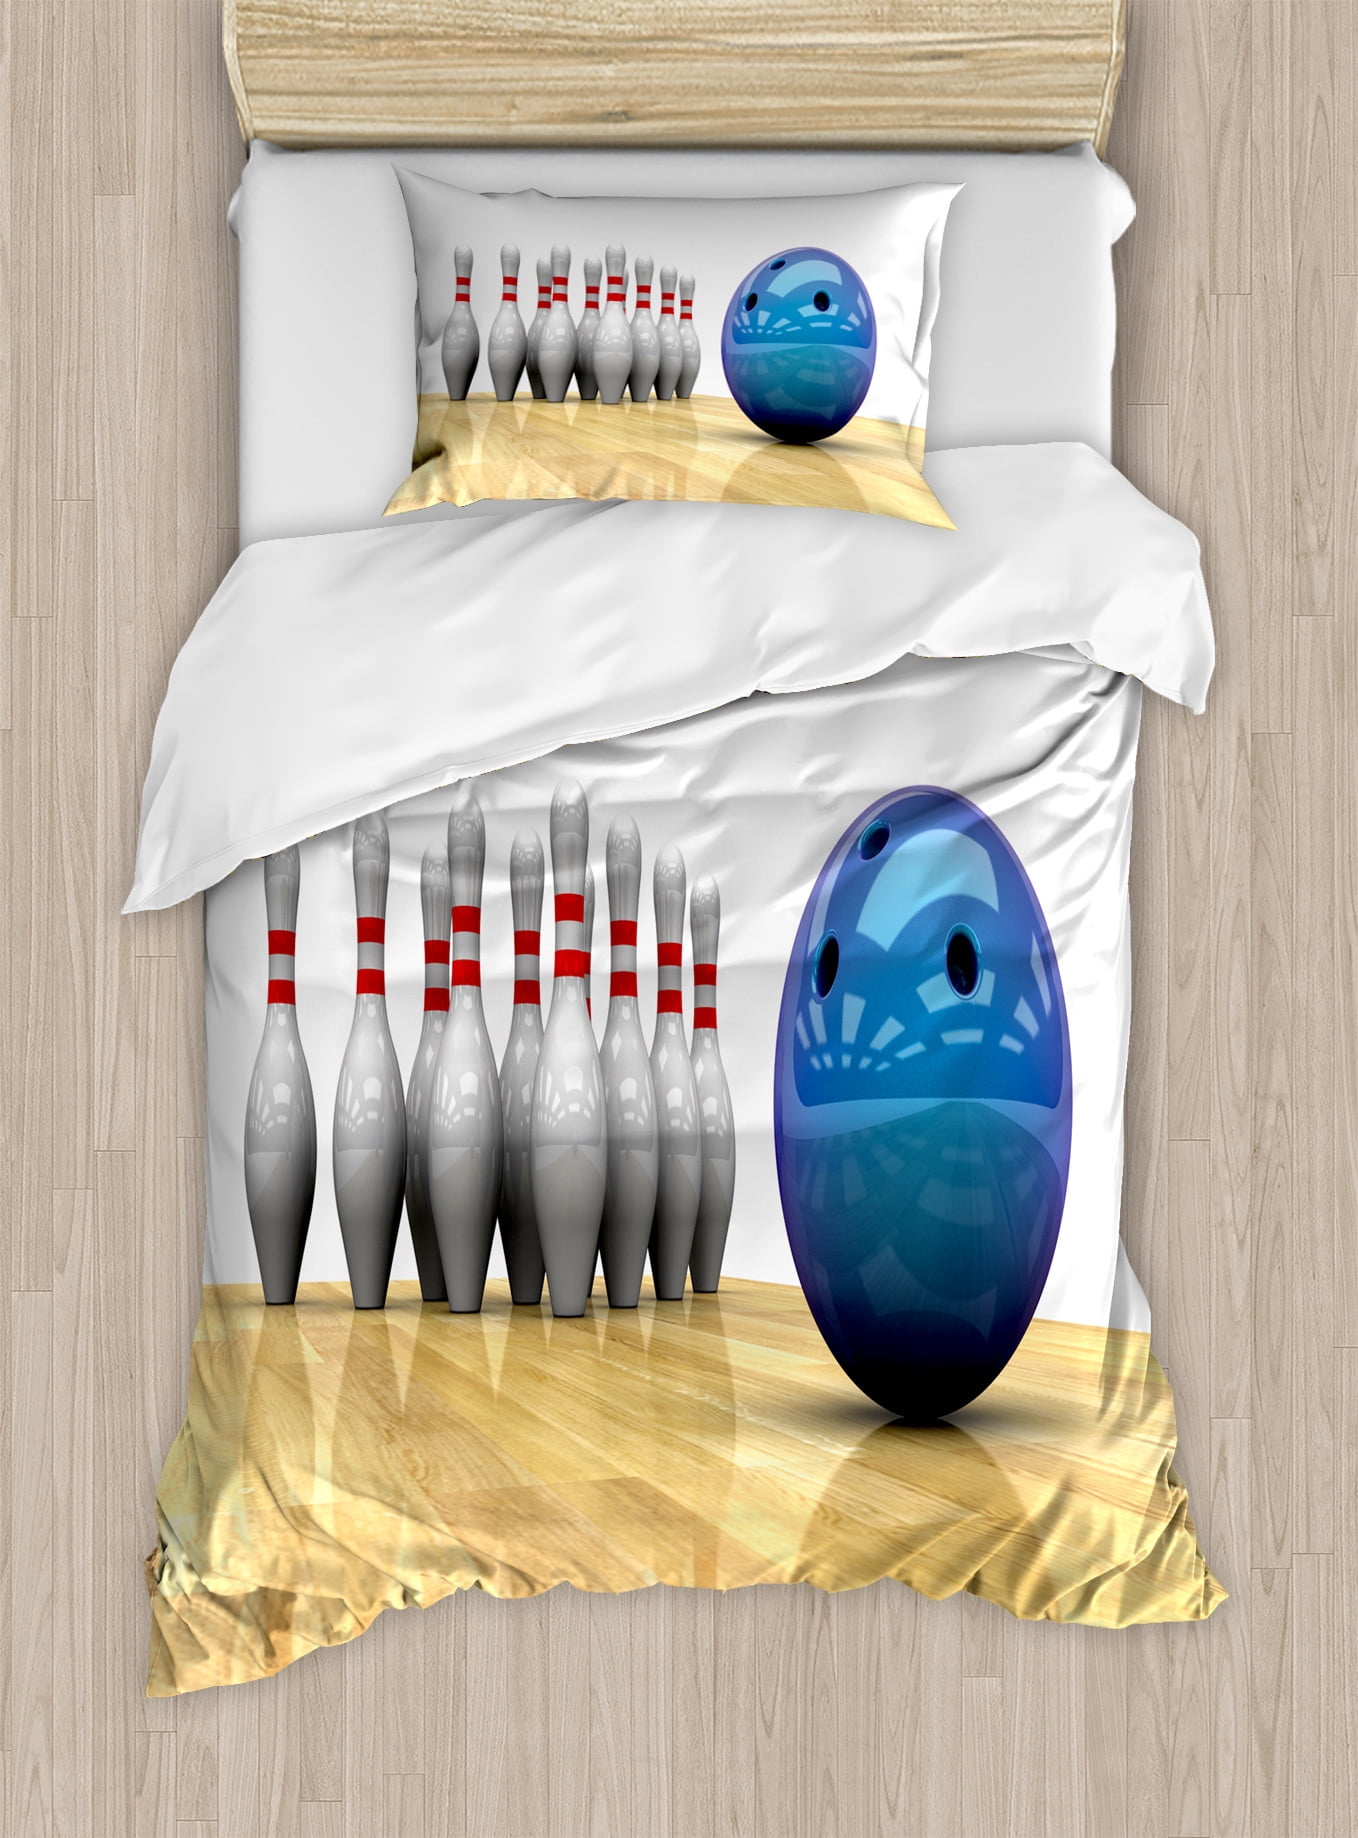 Ambesonne Bowling Party Duvet Cover Set, Symmetrical Pins, King, Blue White  Red